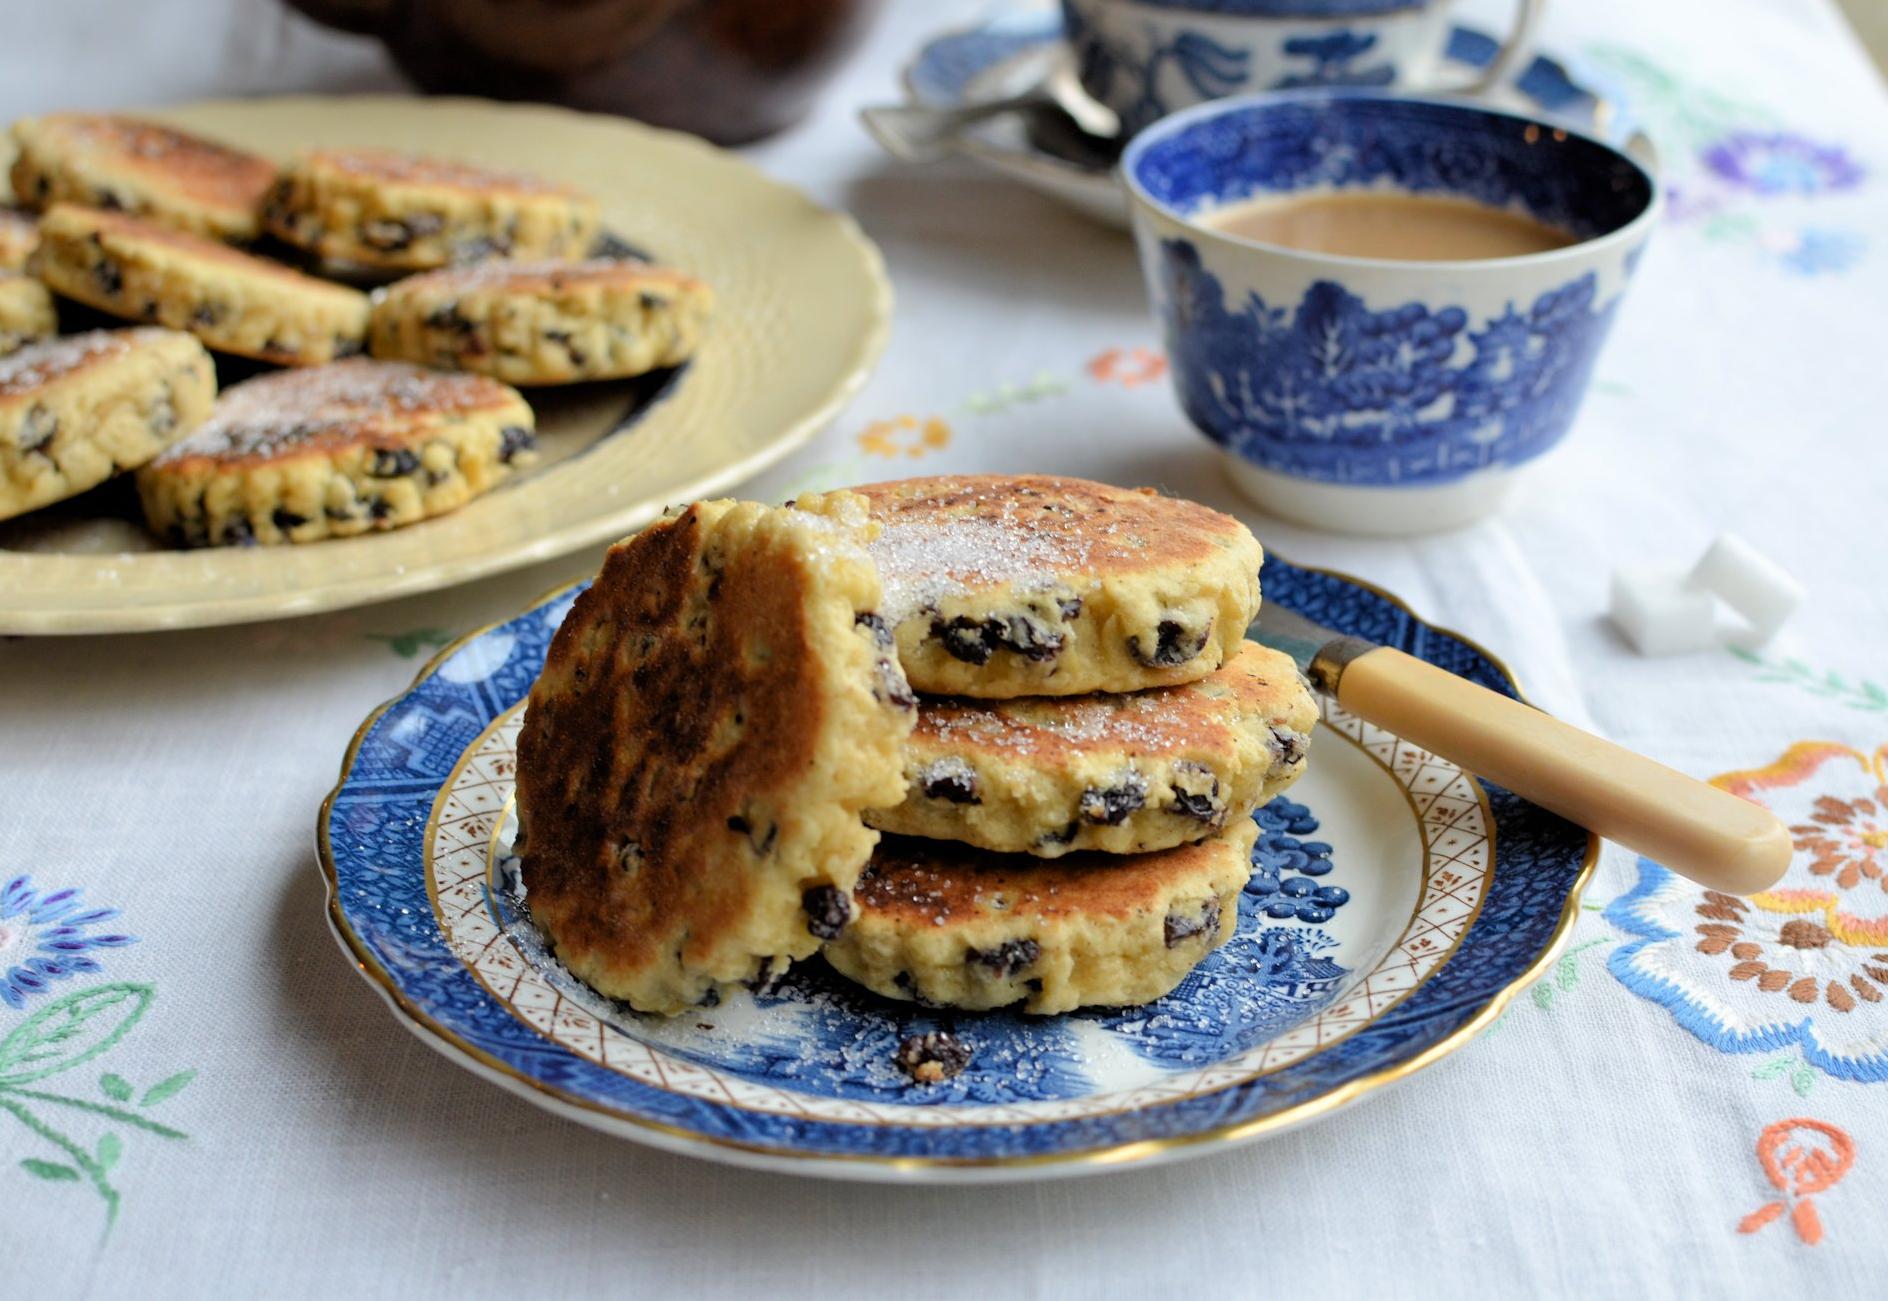  Who says Christmas baking has to be complicated? These Welsh cakes are easy and delicious.